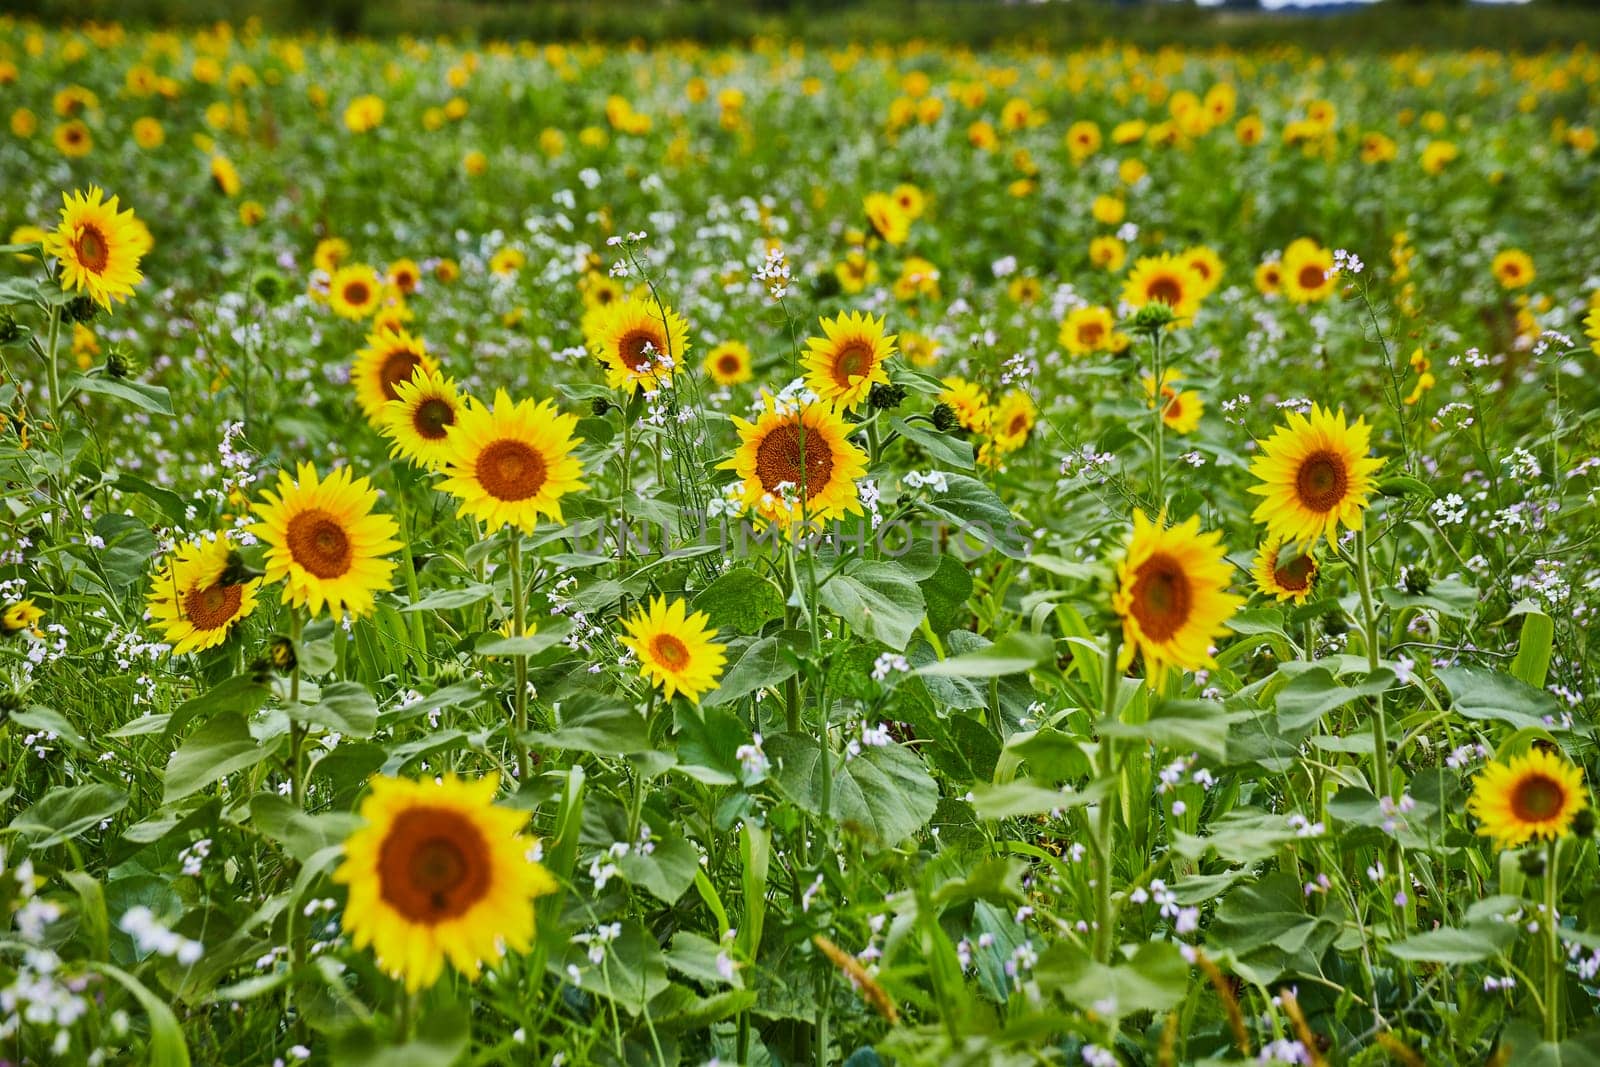 Sunflower and Wildflower Field in Bloom with Shallow Depth of Field by njproductions